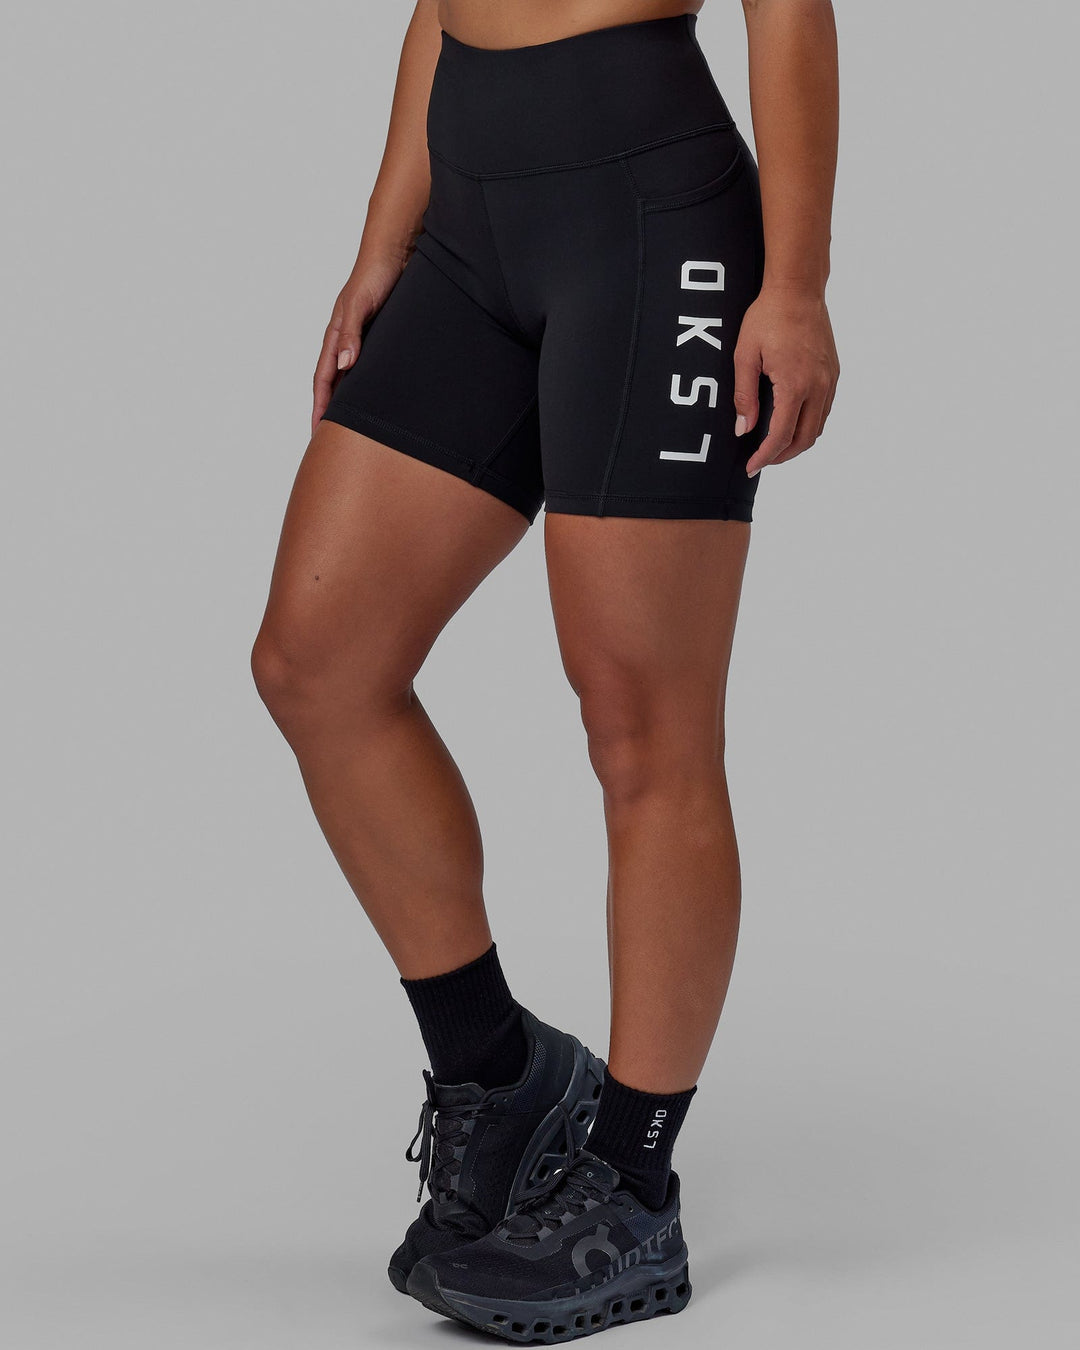 Woman wearing Rep Mid Short Tight - Black-White